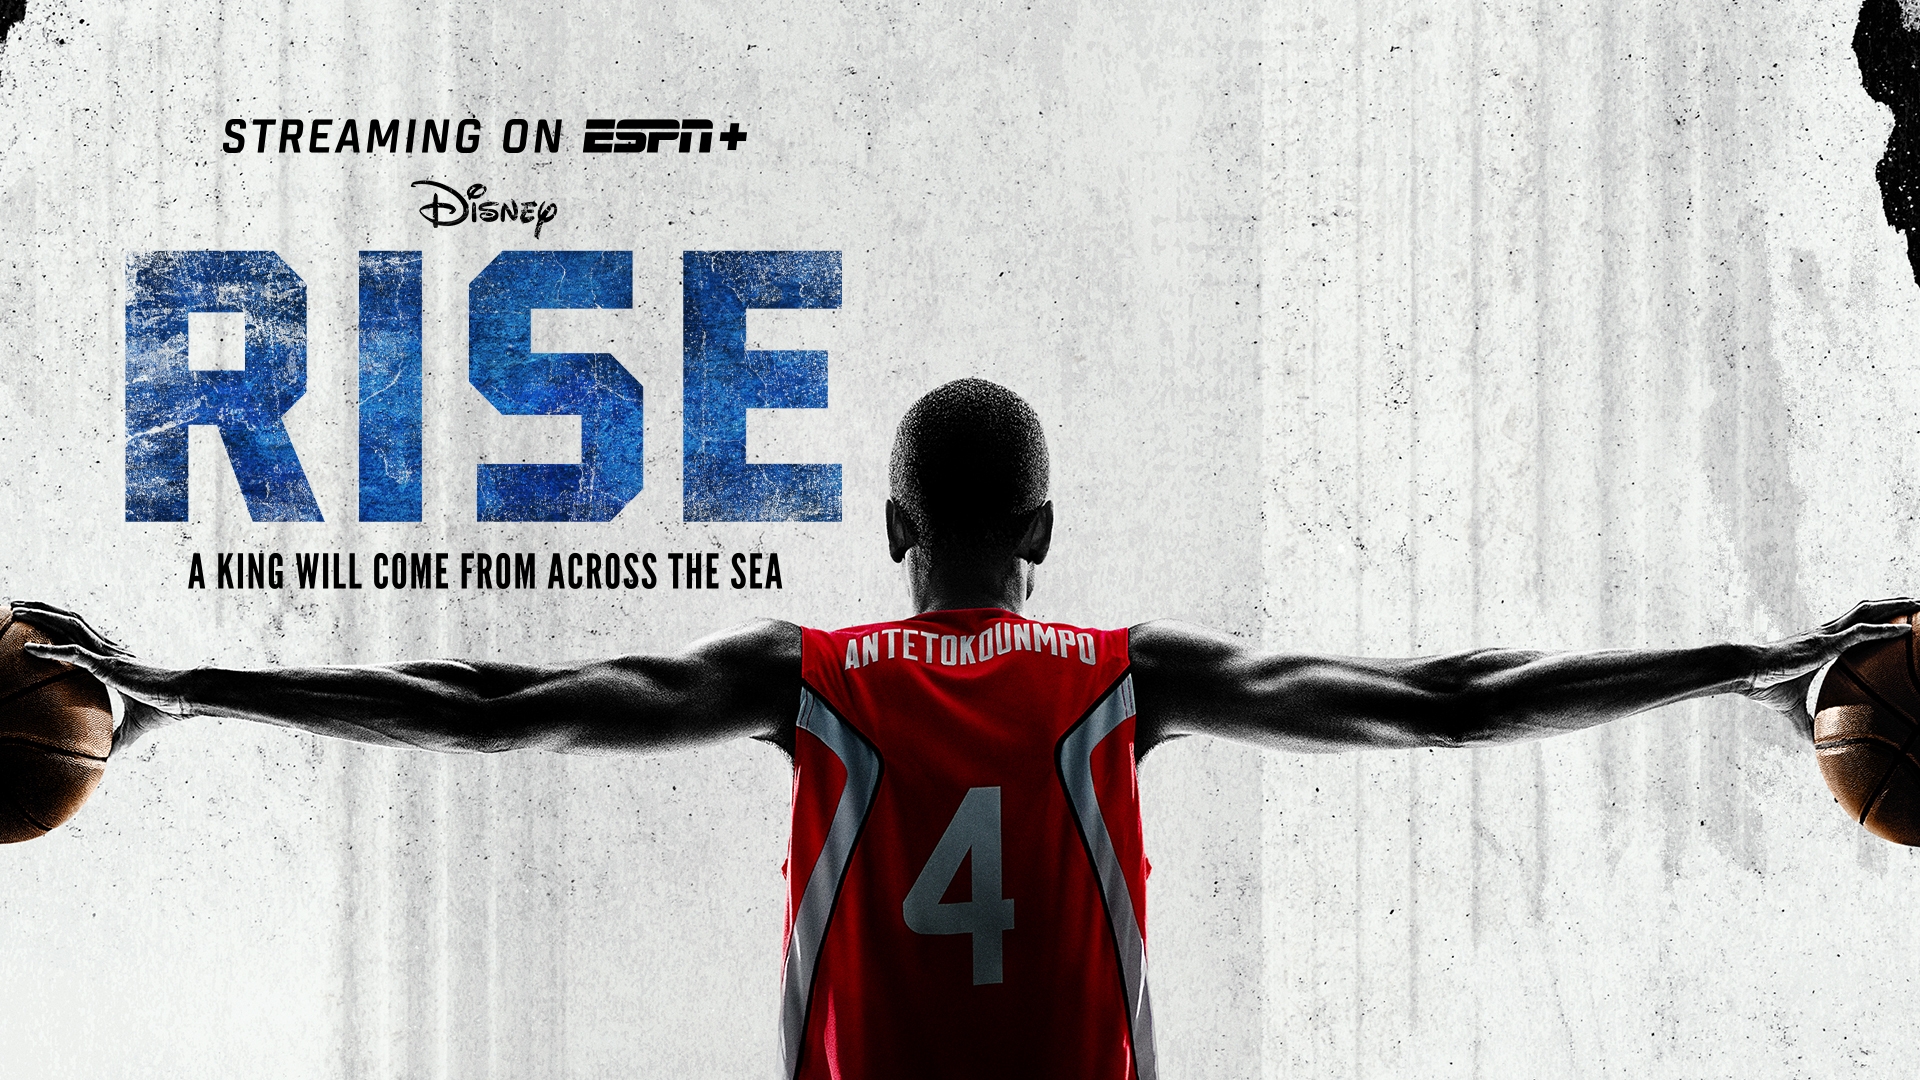 Rise': The incredible true Antetokounmpo story is now streaming on ESPN+ -  Stream the Video - Watch ESPN